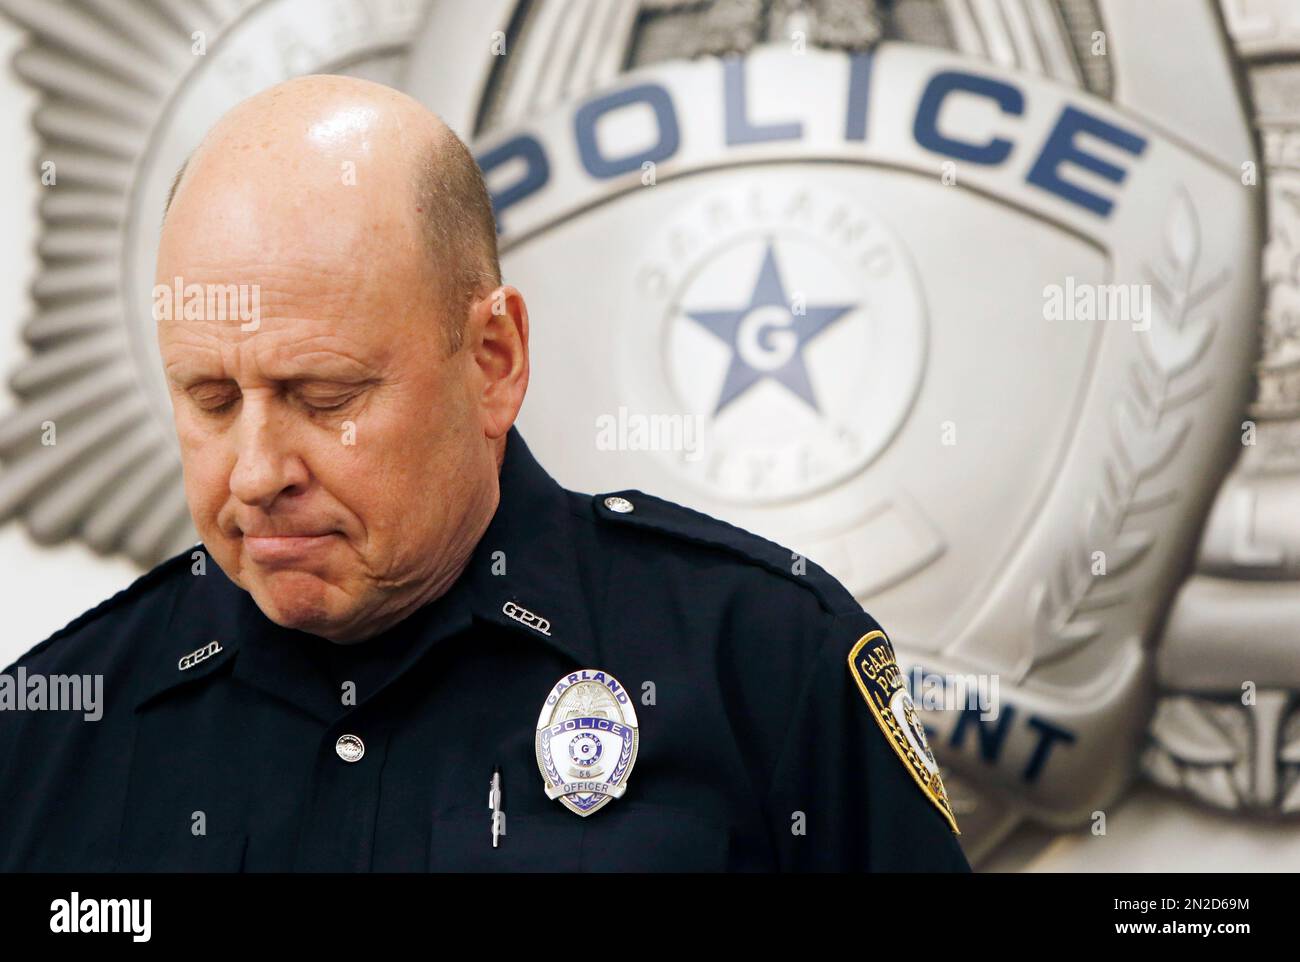 Garland Police spokesperson Joe Harn addresses the media during a news  conference at the Garland Police Department, Monday, May 4, 2015, in Garland,  Texas. Police shot and killed two men after they